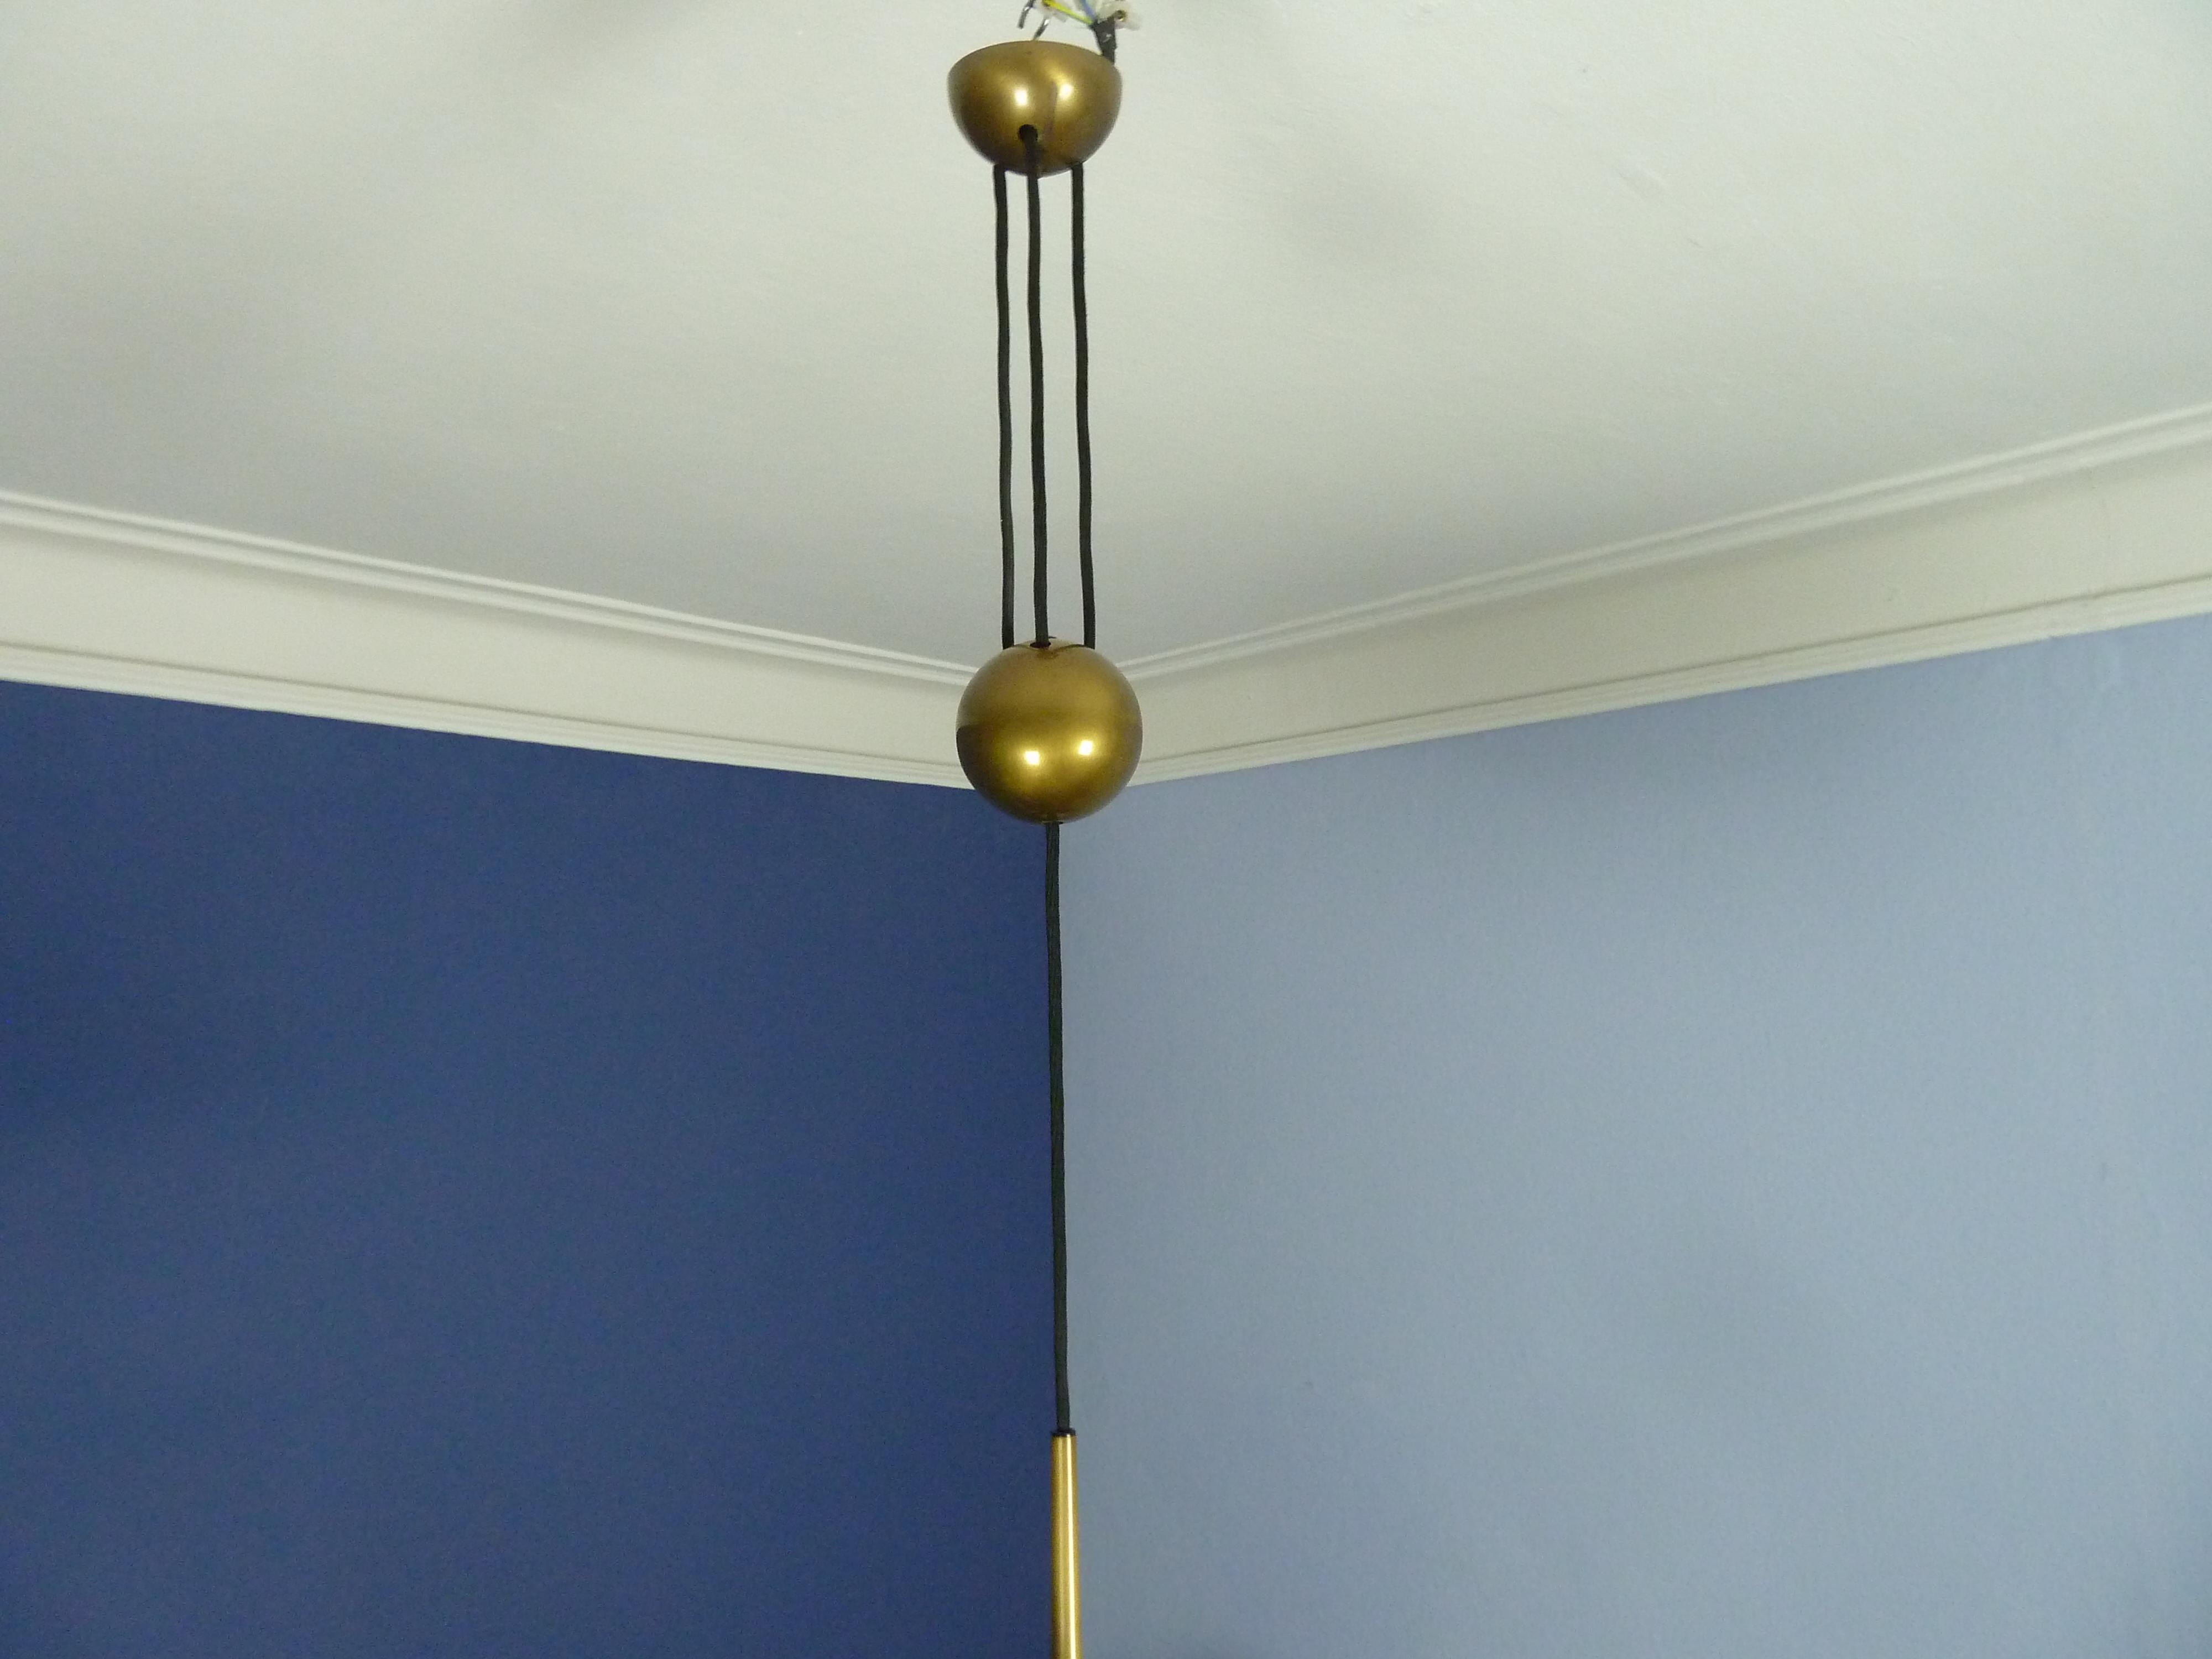 Adjustable Brass Pendant Onos55 by Florian Schulz with a Central Counterweight 1